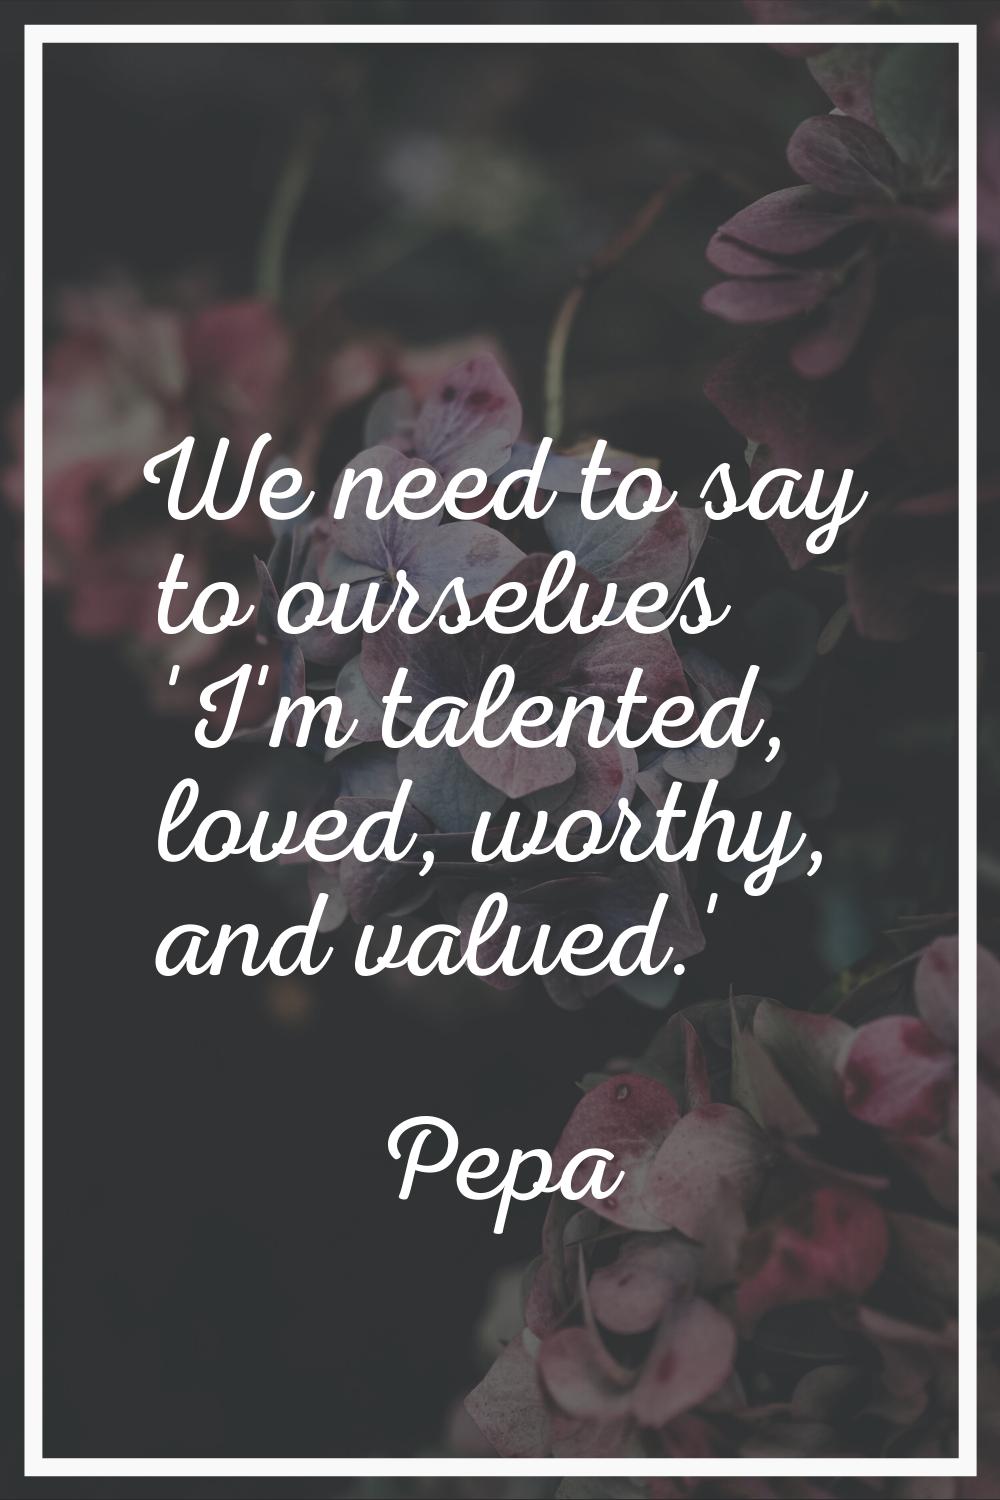 We need to say to ourselves 'I'm talented, loved, worthy, and valued.'